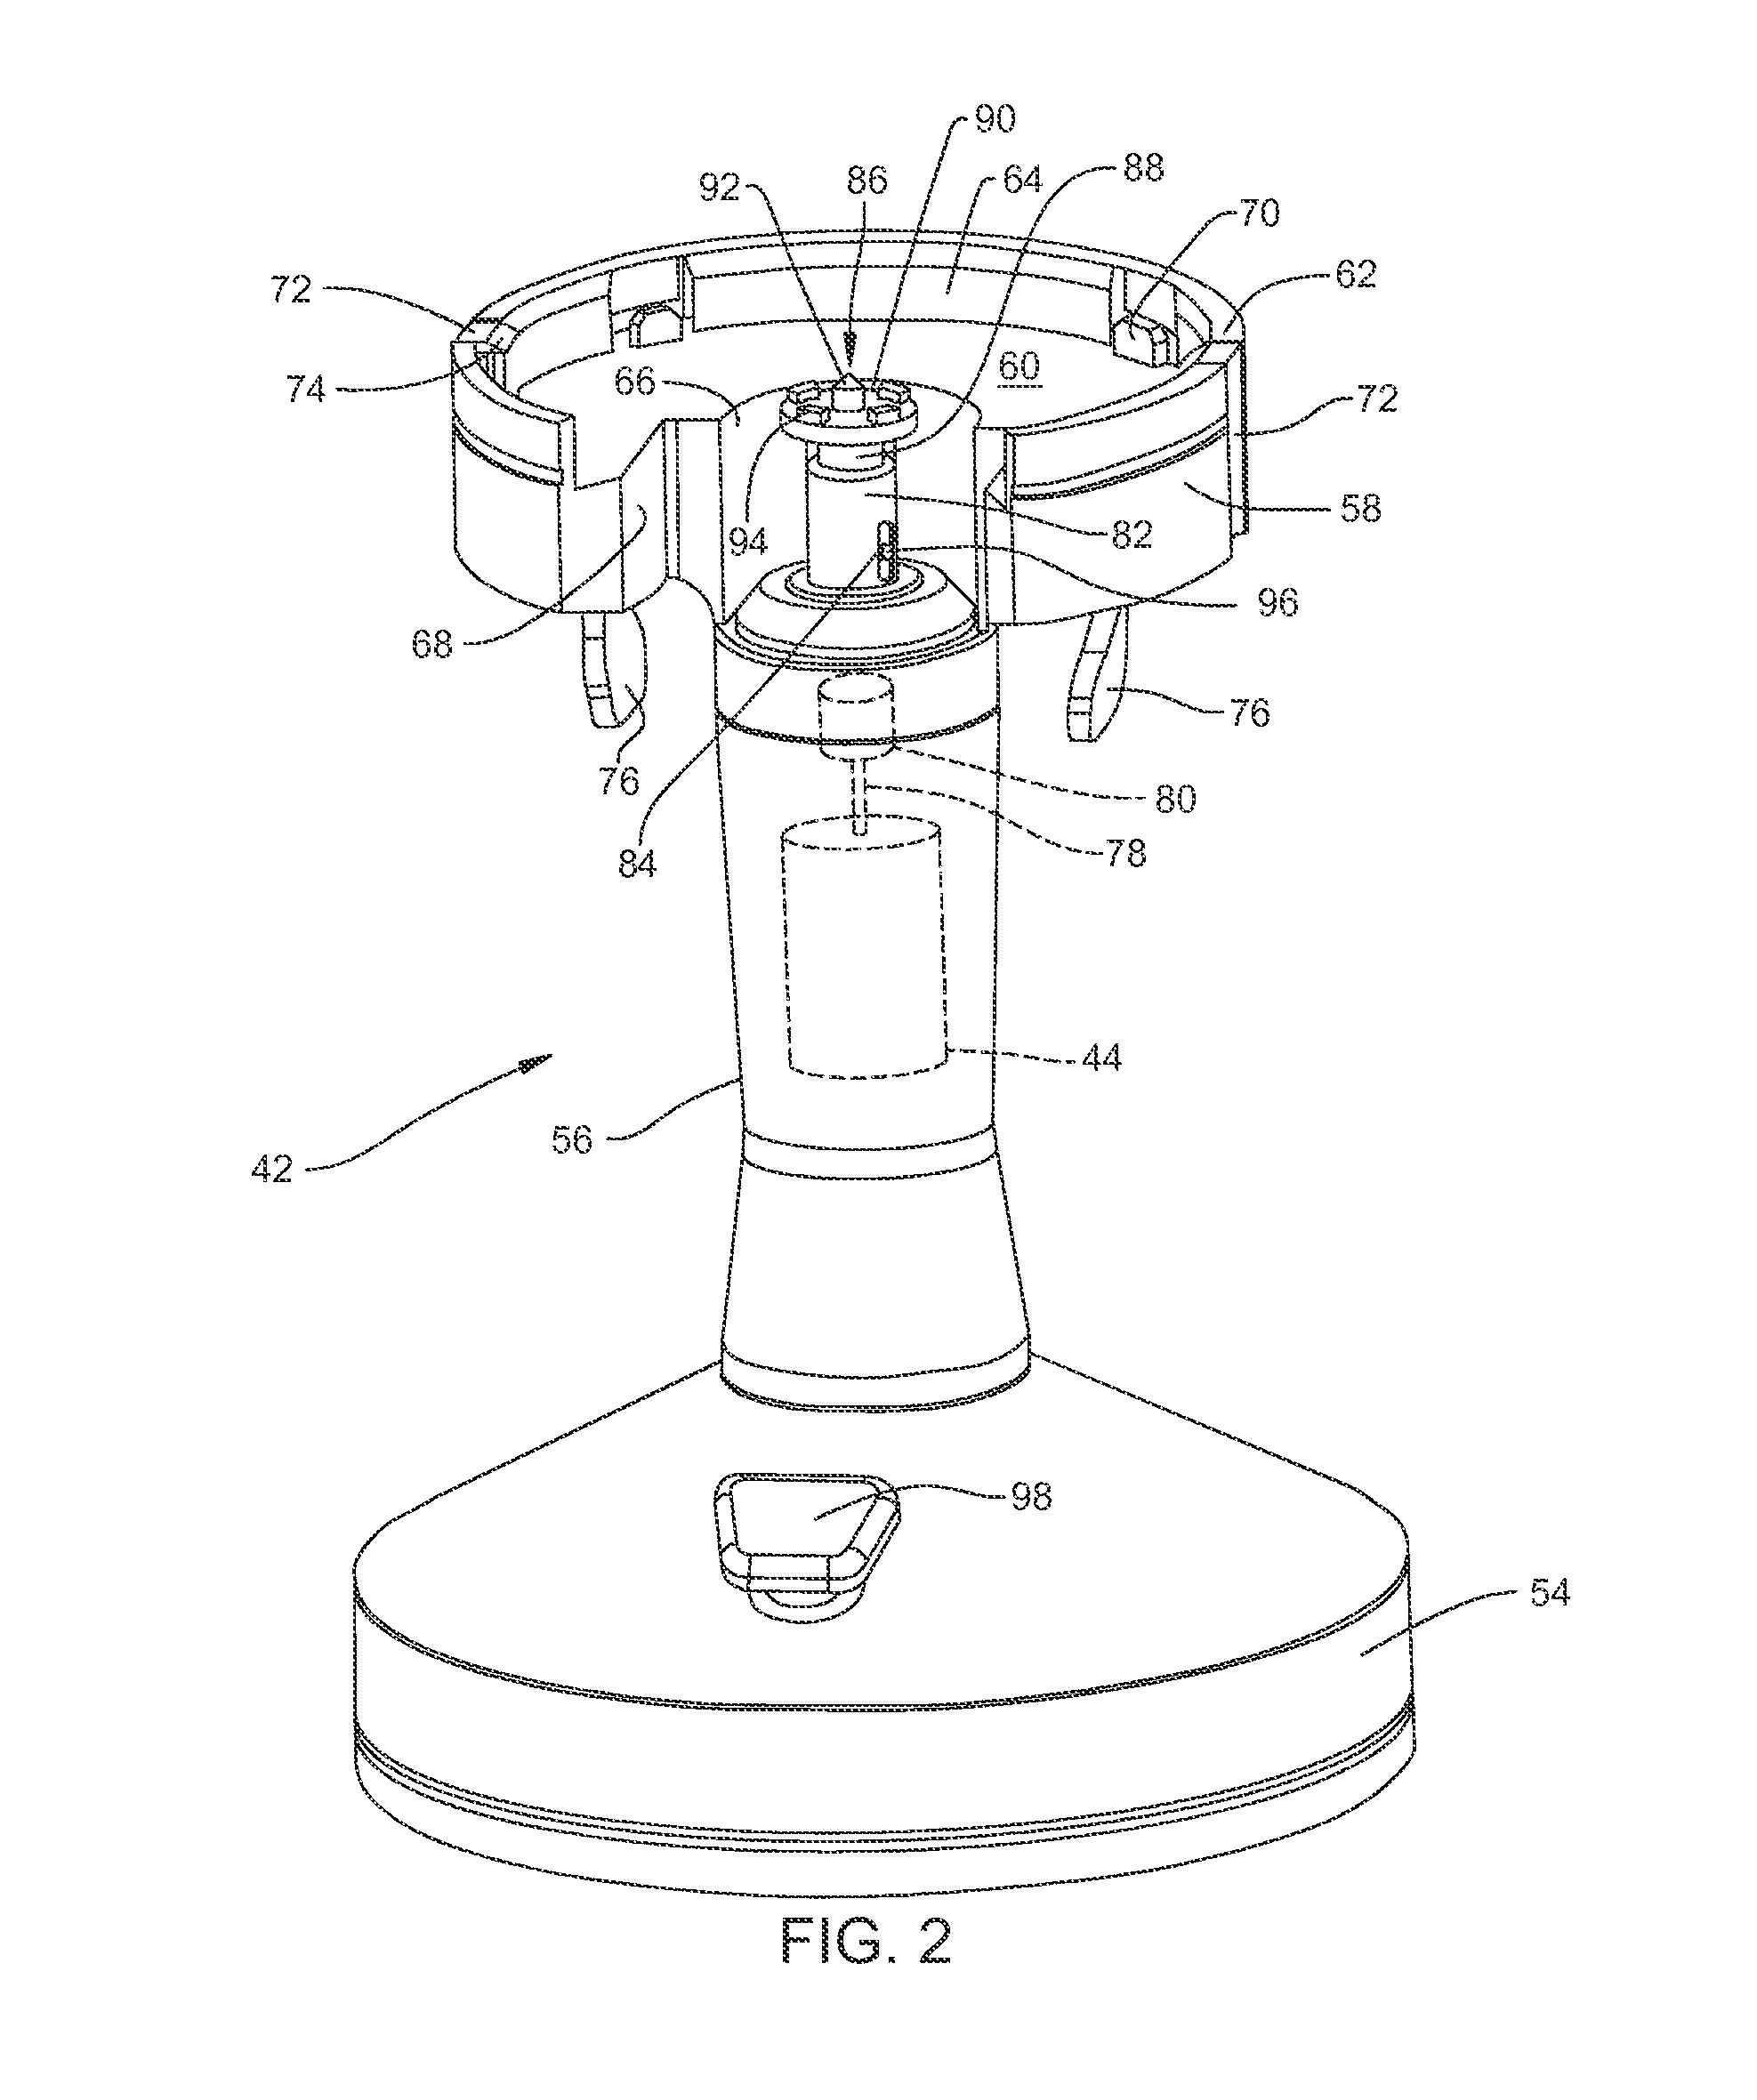 Bone cleaning assembly with a rotating cutting flute that is surrounded by a rotating shaving tube